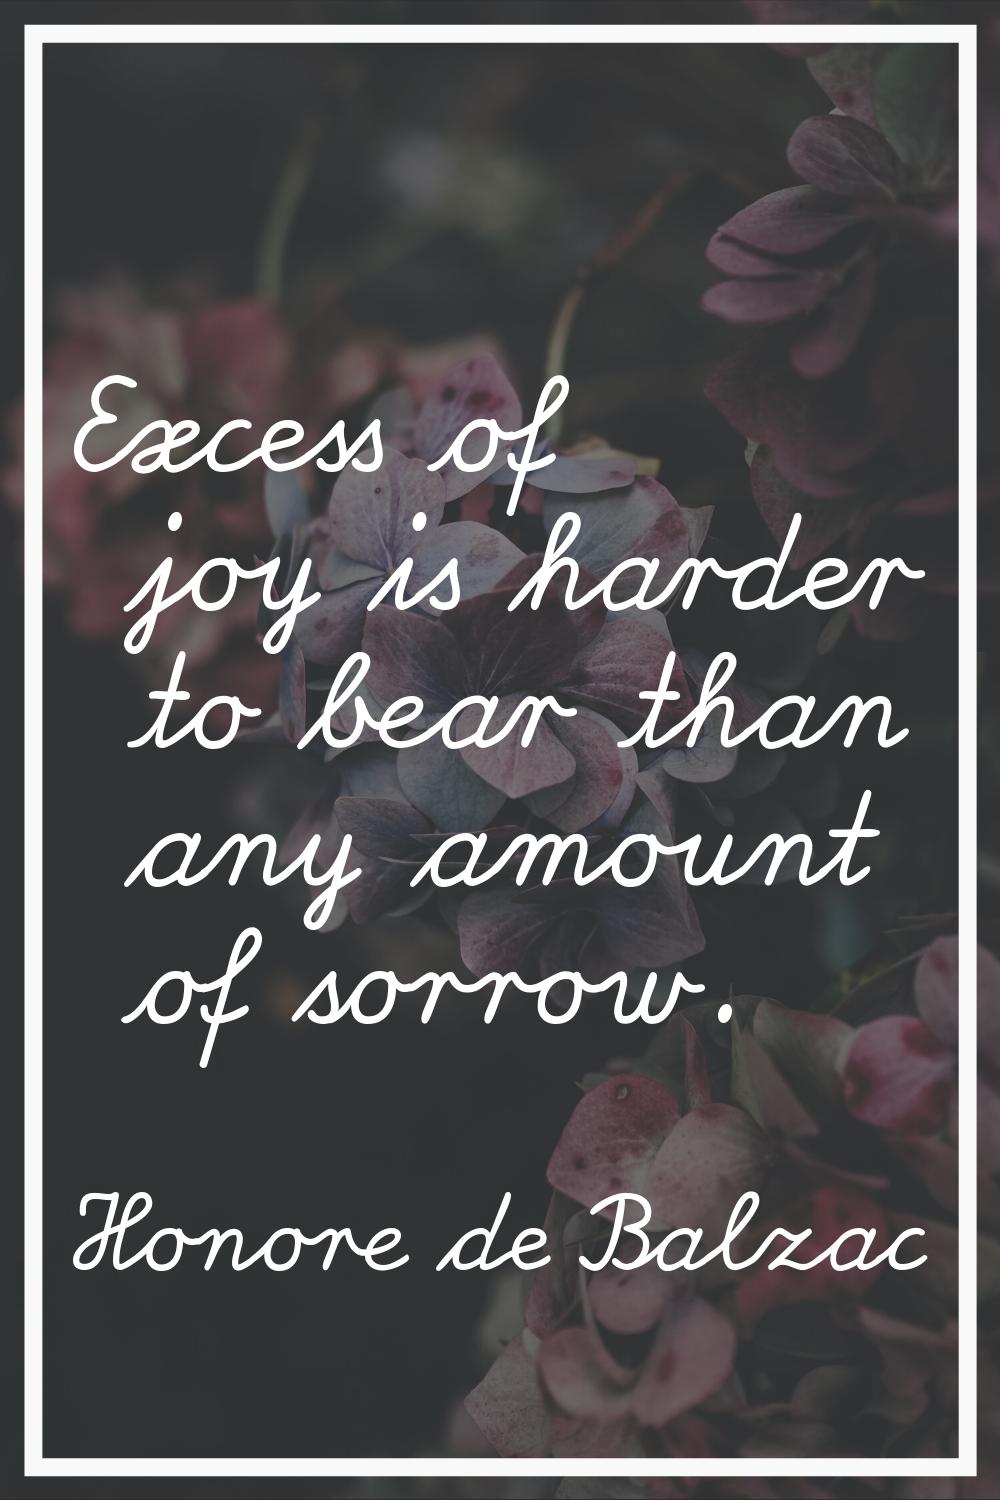 Excess of joy is harder to bear than any amount of sorrow.